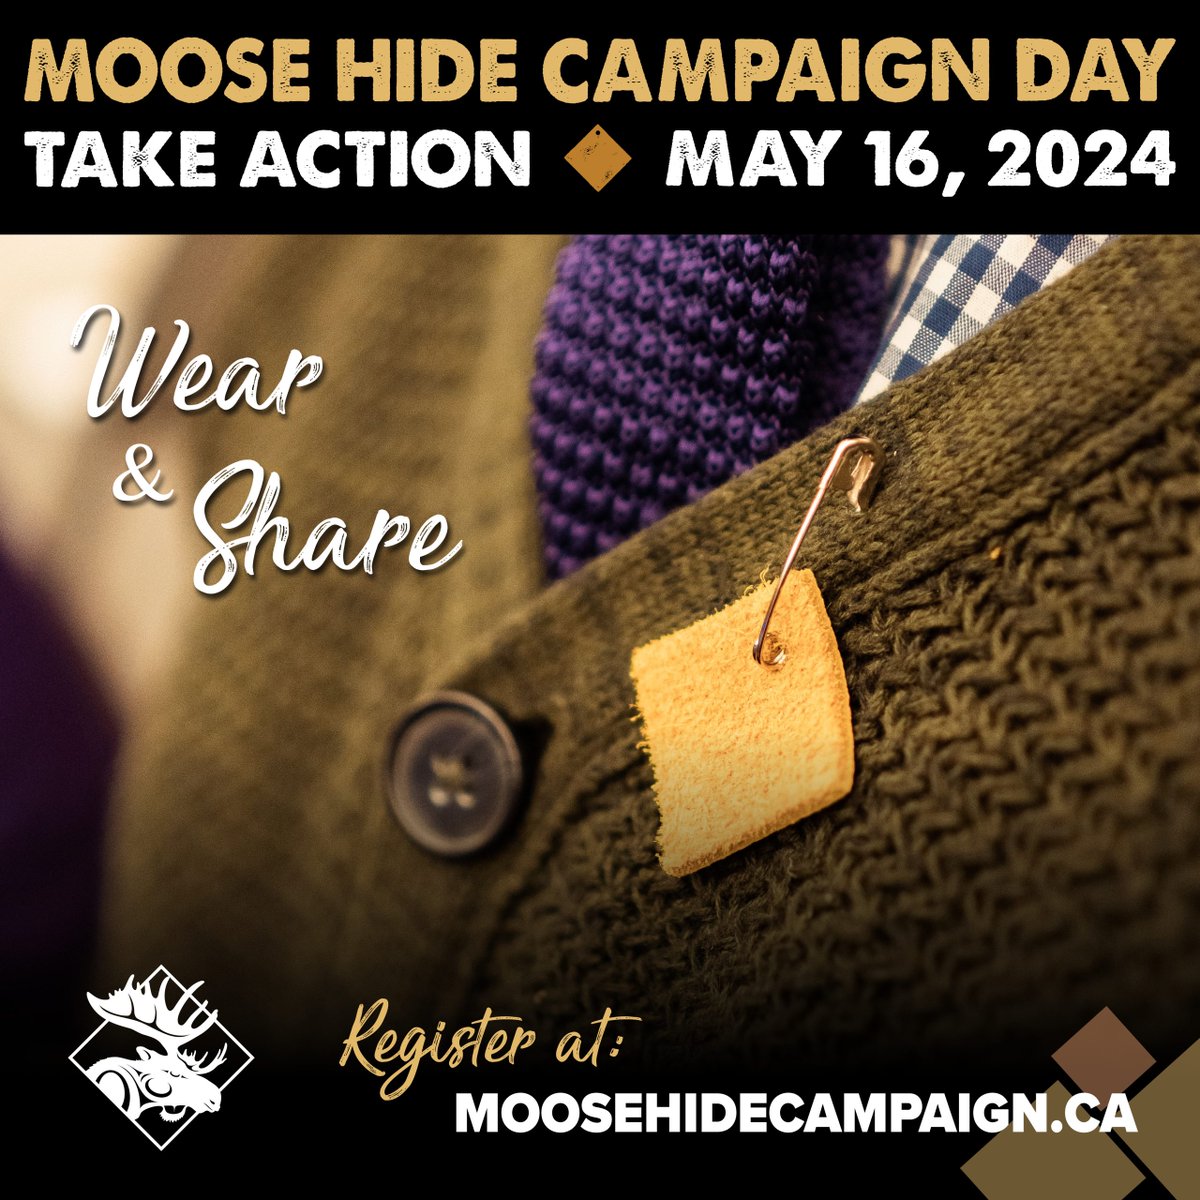 Join us on May 16 to participate in the Moose Hide Campaign. Today we wear a square moose hide pin to honour our commitment to #endviolence and address the root causes of trauma. See Public Health Motion #07-24 for local efforts. #MooseHideCampaign #MooseHideCampaignDay